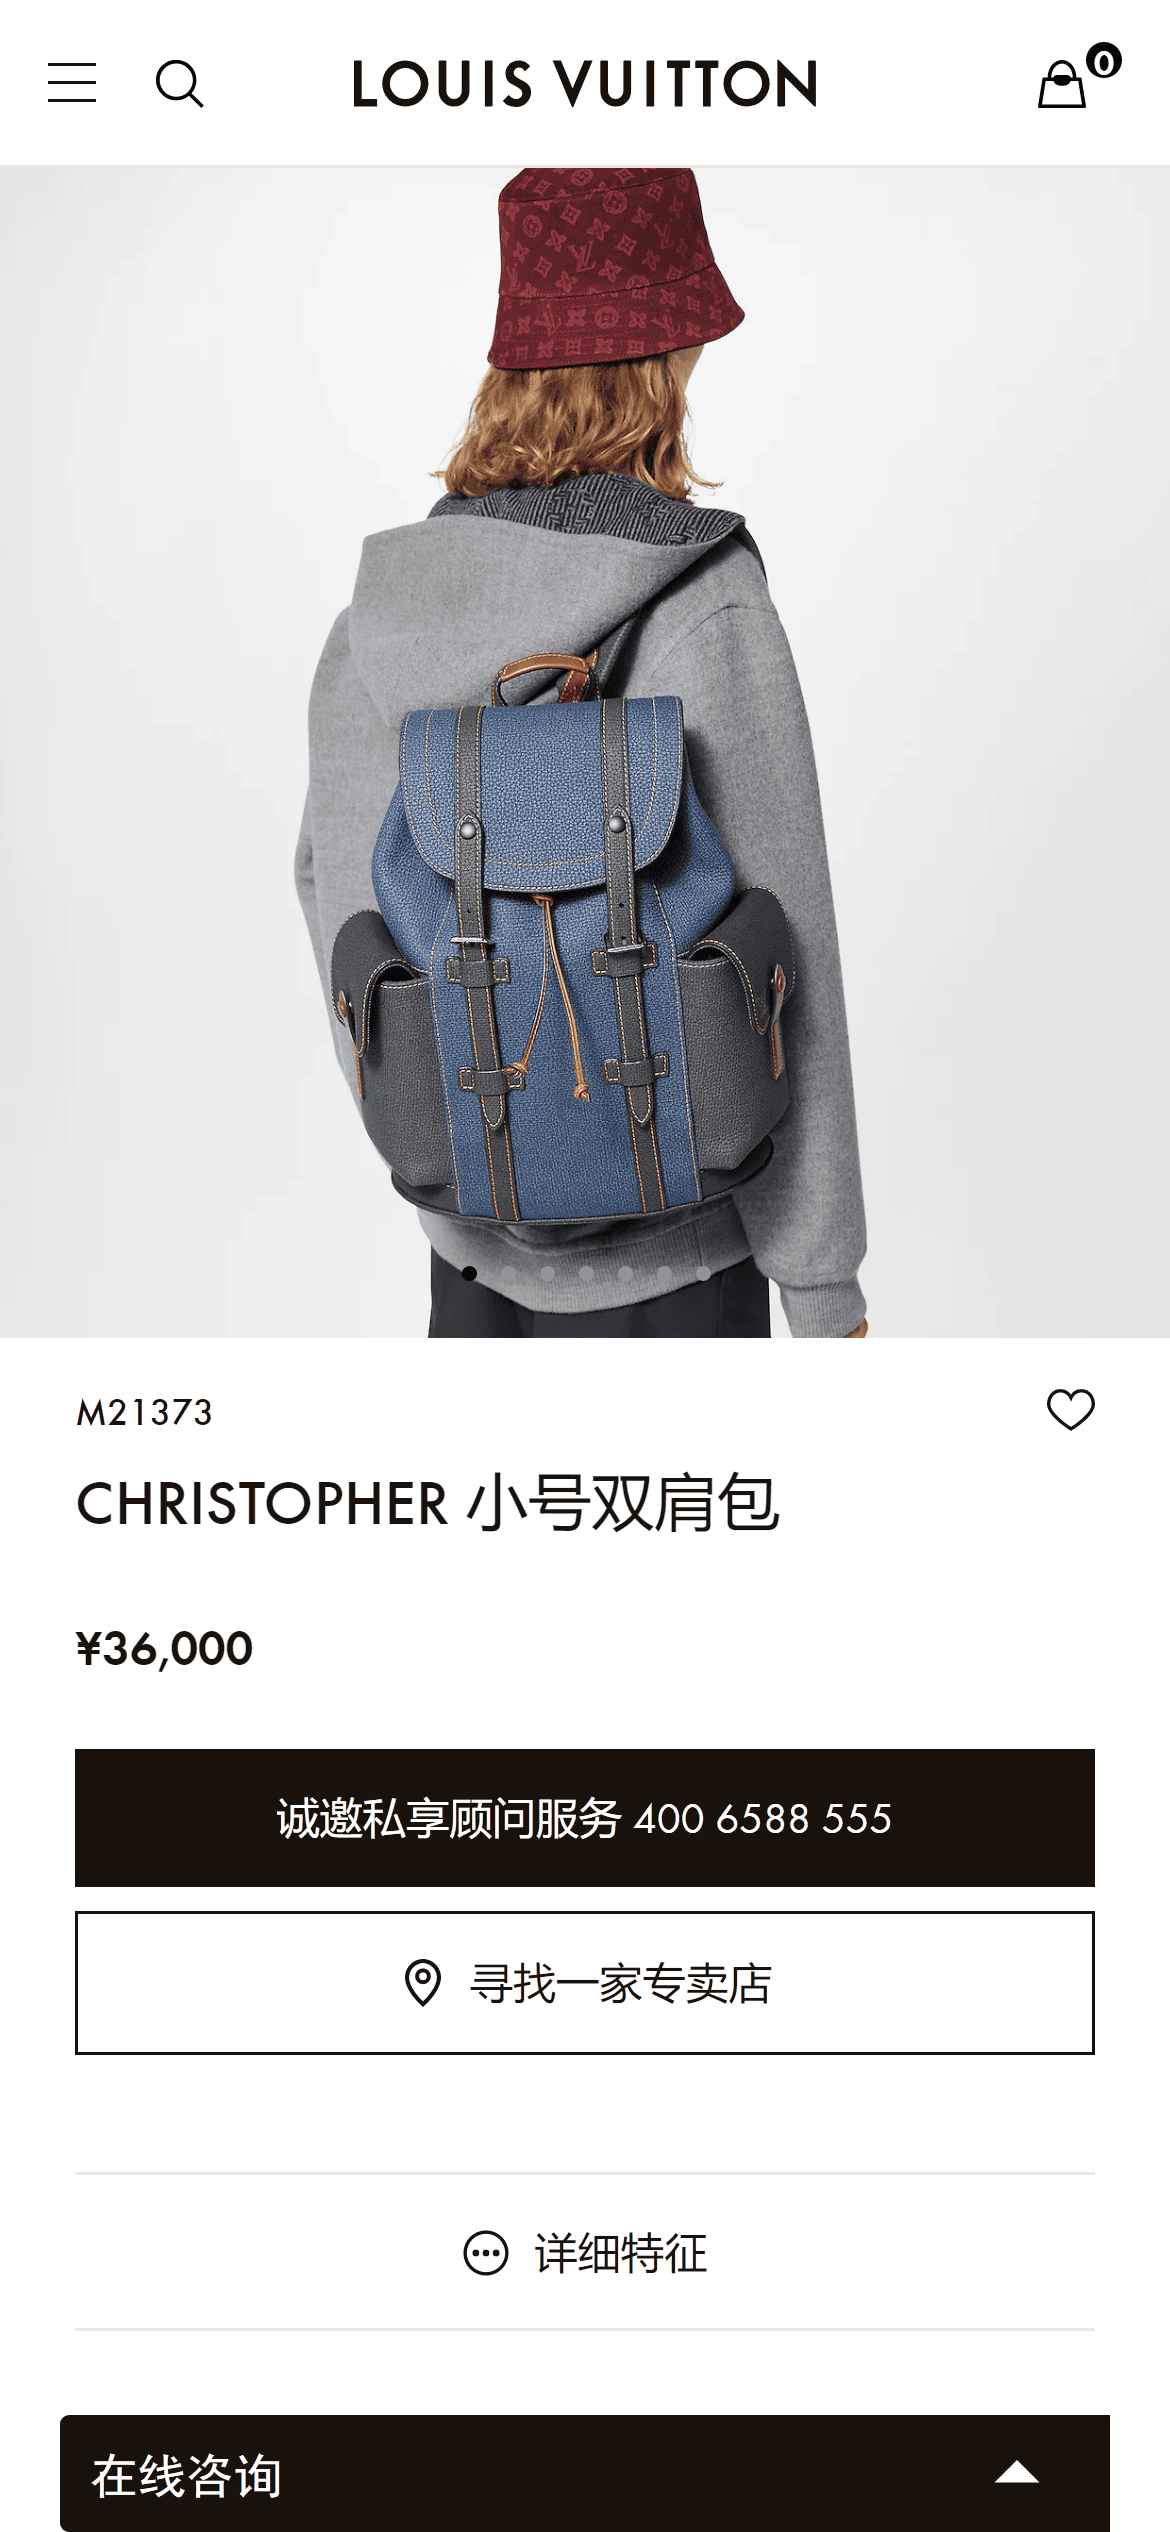 www.louisvuitton.cn_zhs-cn_products_christopher-pm-other-leathers-nvprod3880038v_M21373iPhone-12-Pro.png